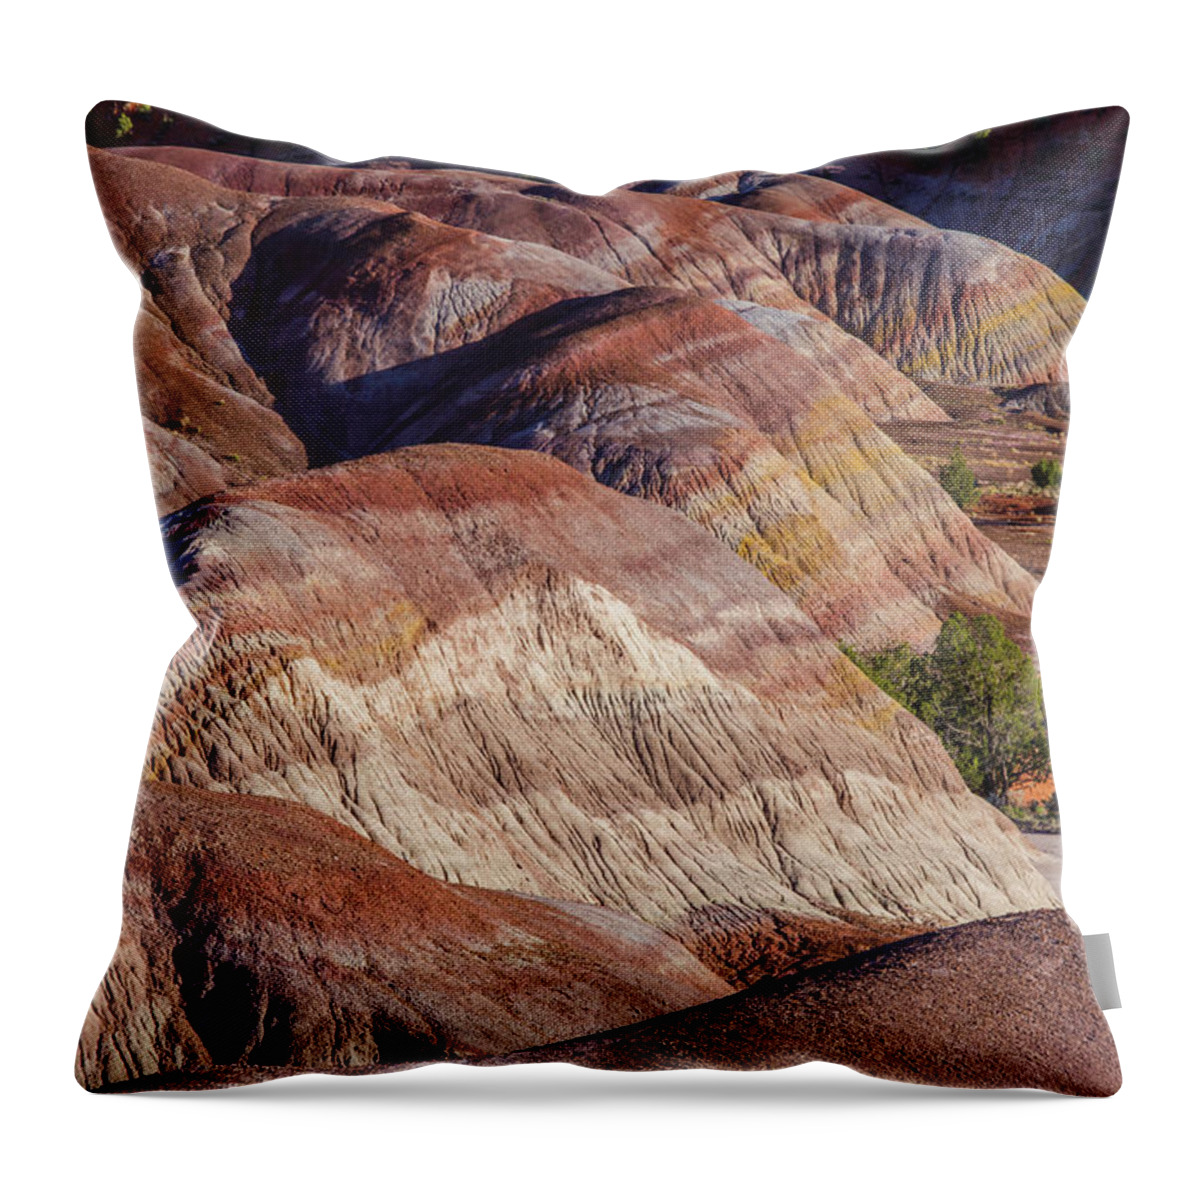 Tranquility Throw Pillow featuring the photograph Sand Stone Rock Formation In Sw Usa #8 by Gavriel Jecan